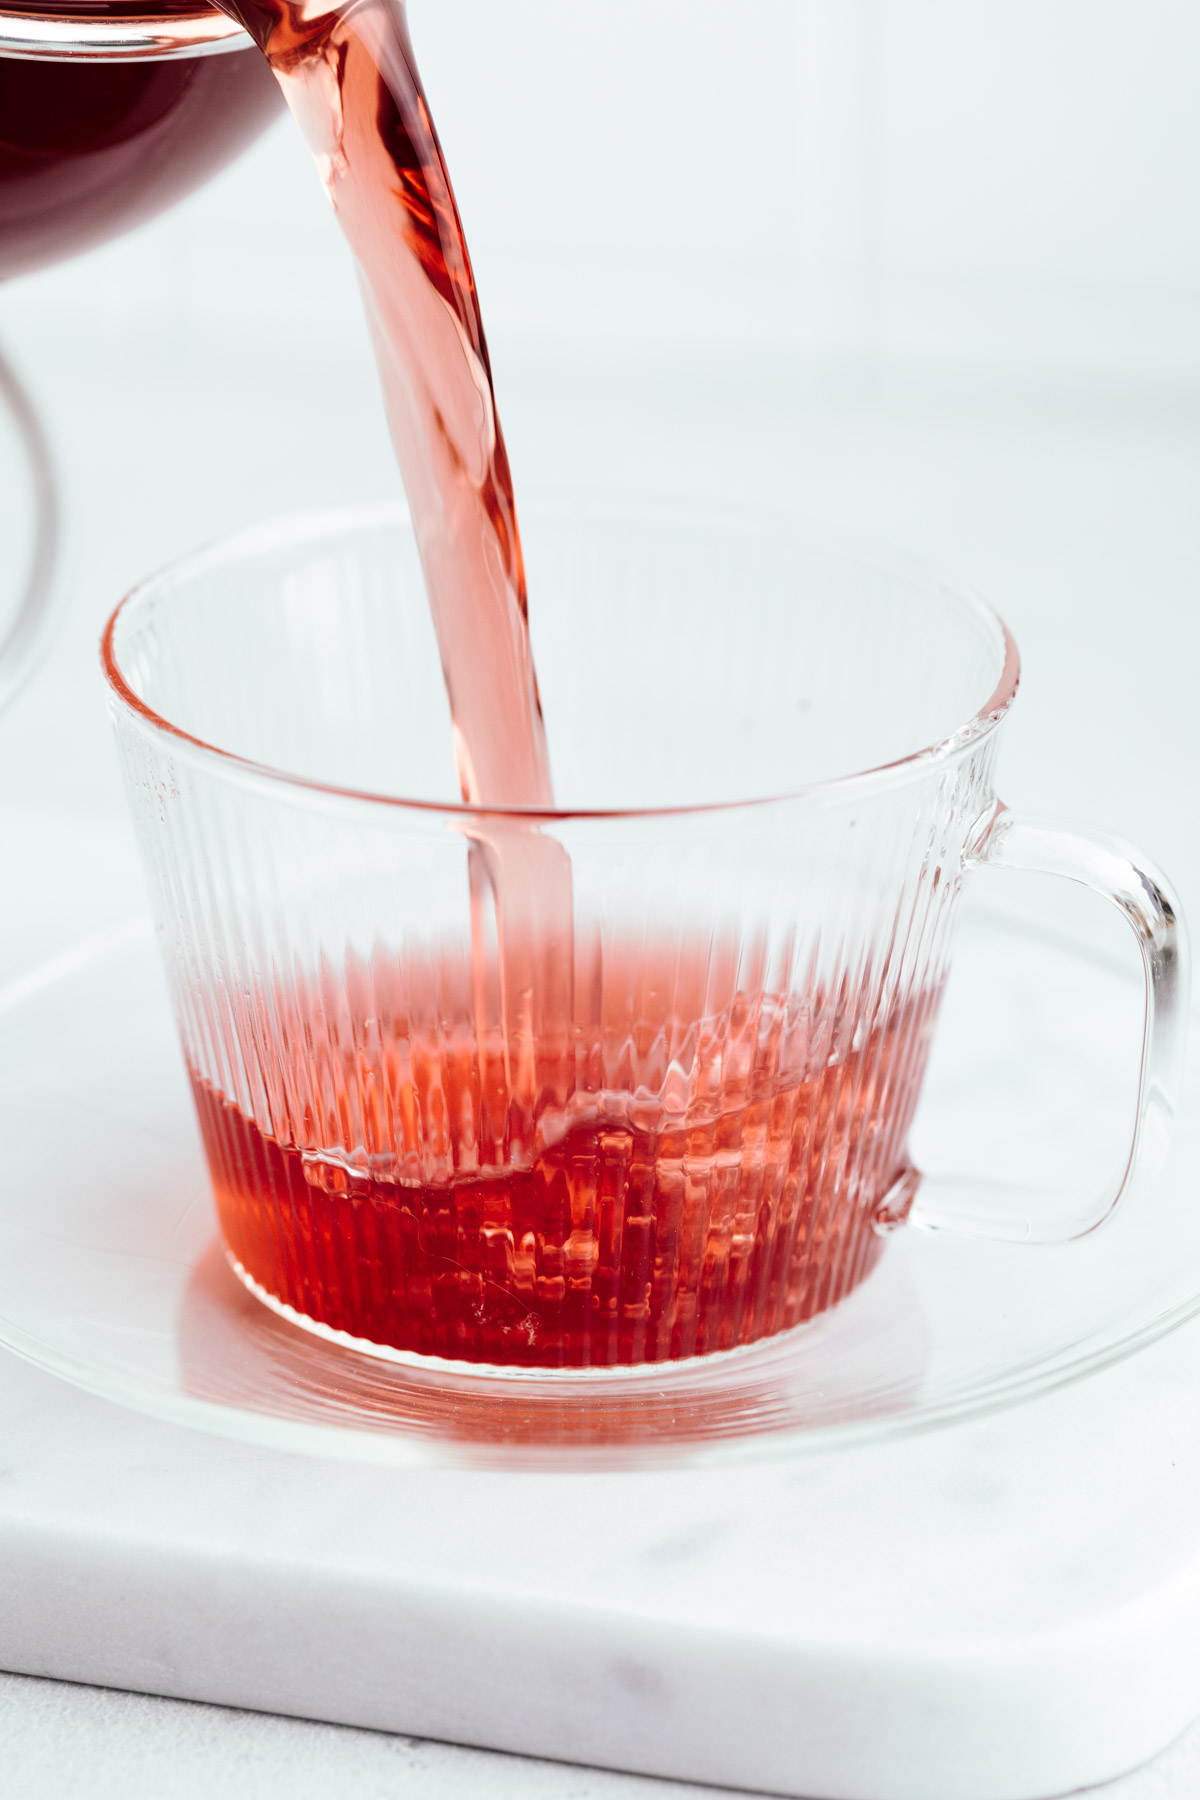 A glass teacup with a glass plate on a white marble backdrop with dark red tea being poured in the teacup.